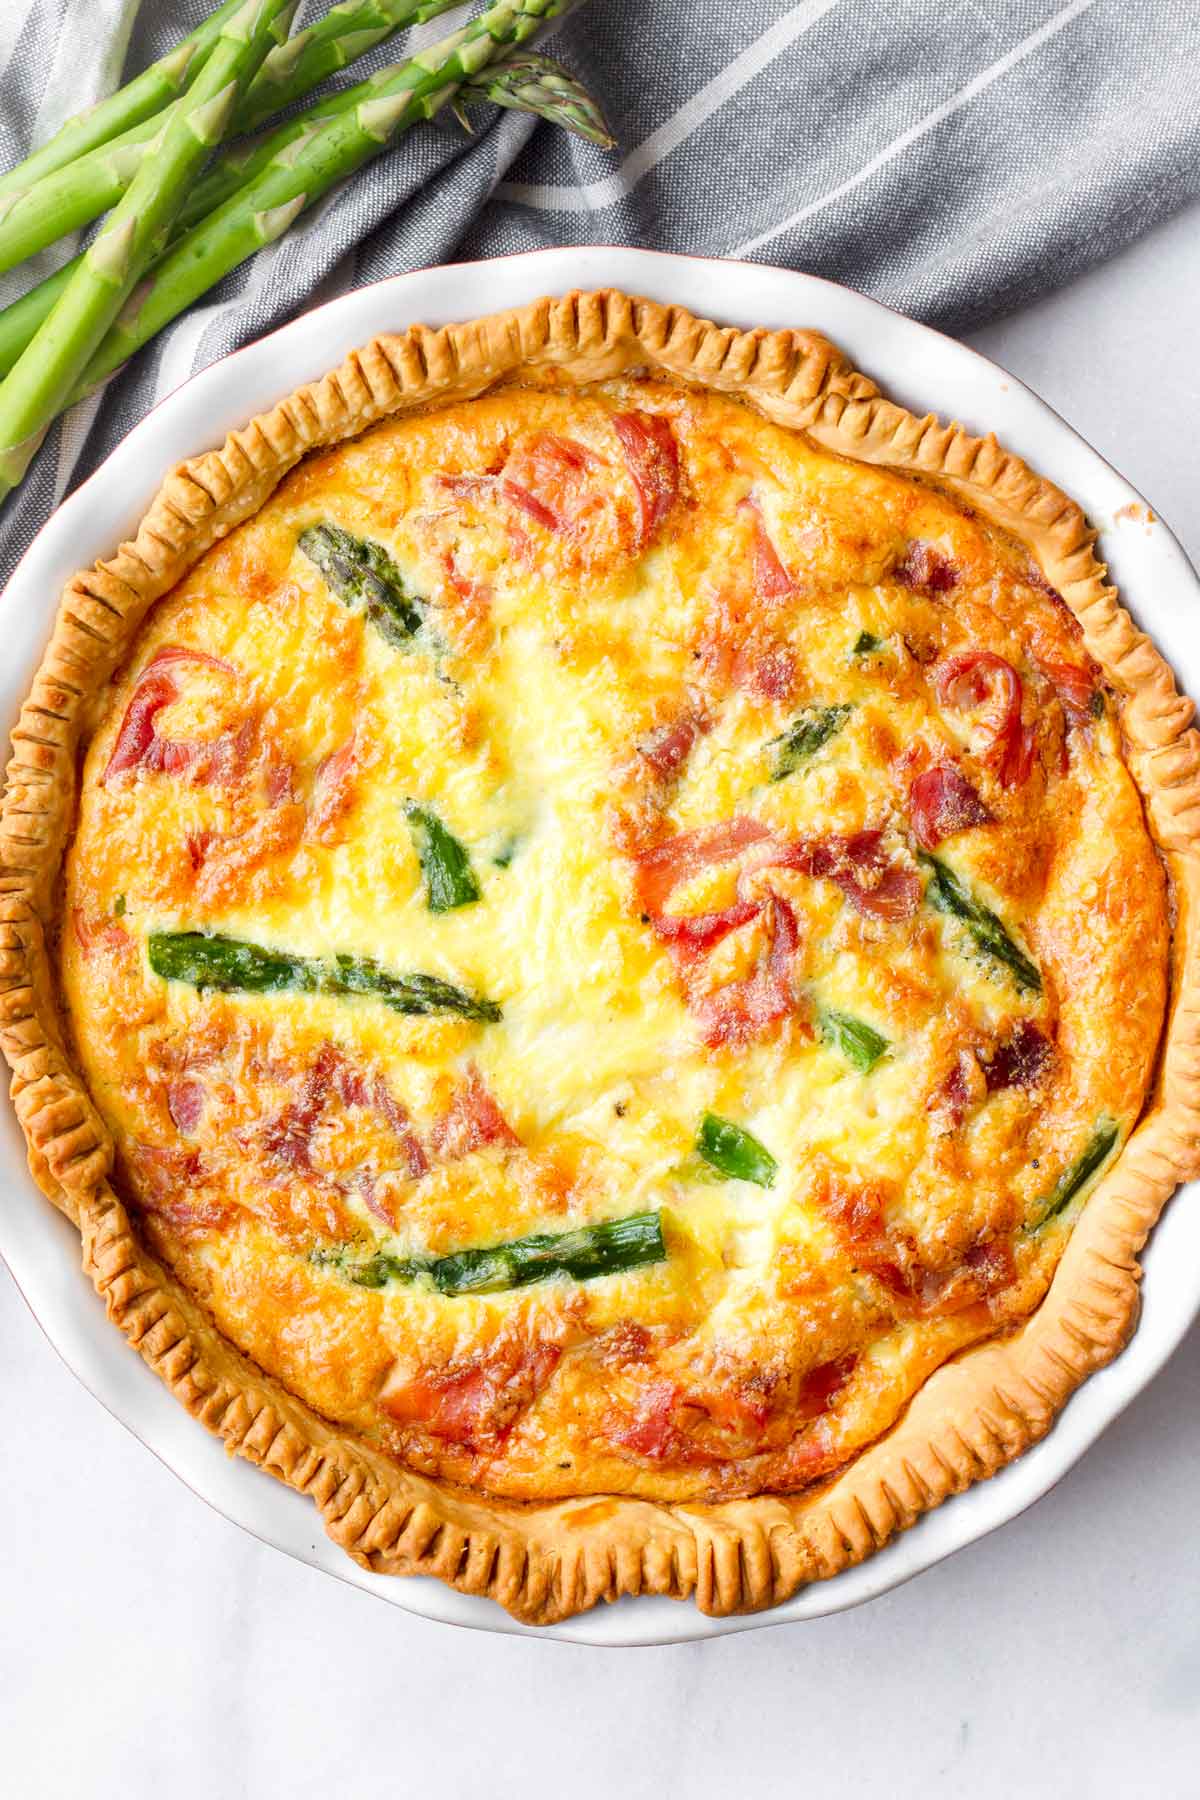 top view of egg quiche made with asparagus and prosciutto